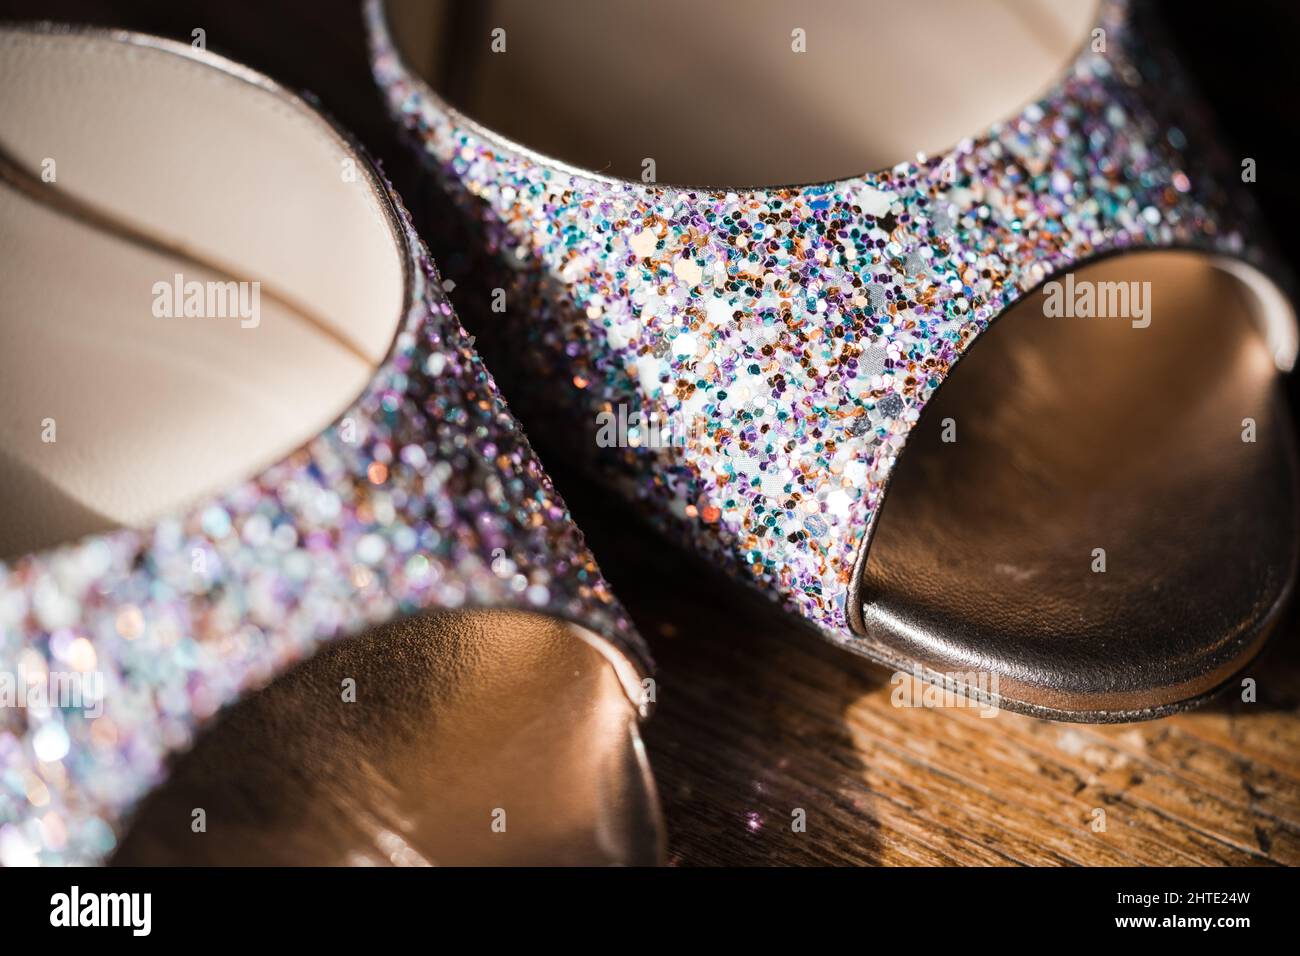 Beautiful glitter shoes close up macro of buckle clasp fastened.  Sparkly bright colours and gold fastener. Stock Photo